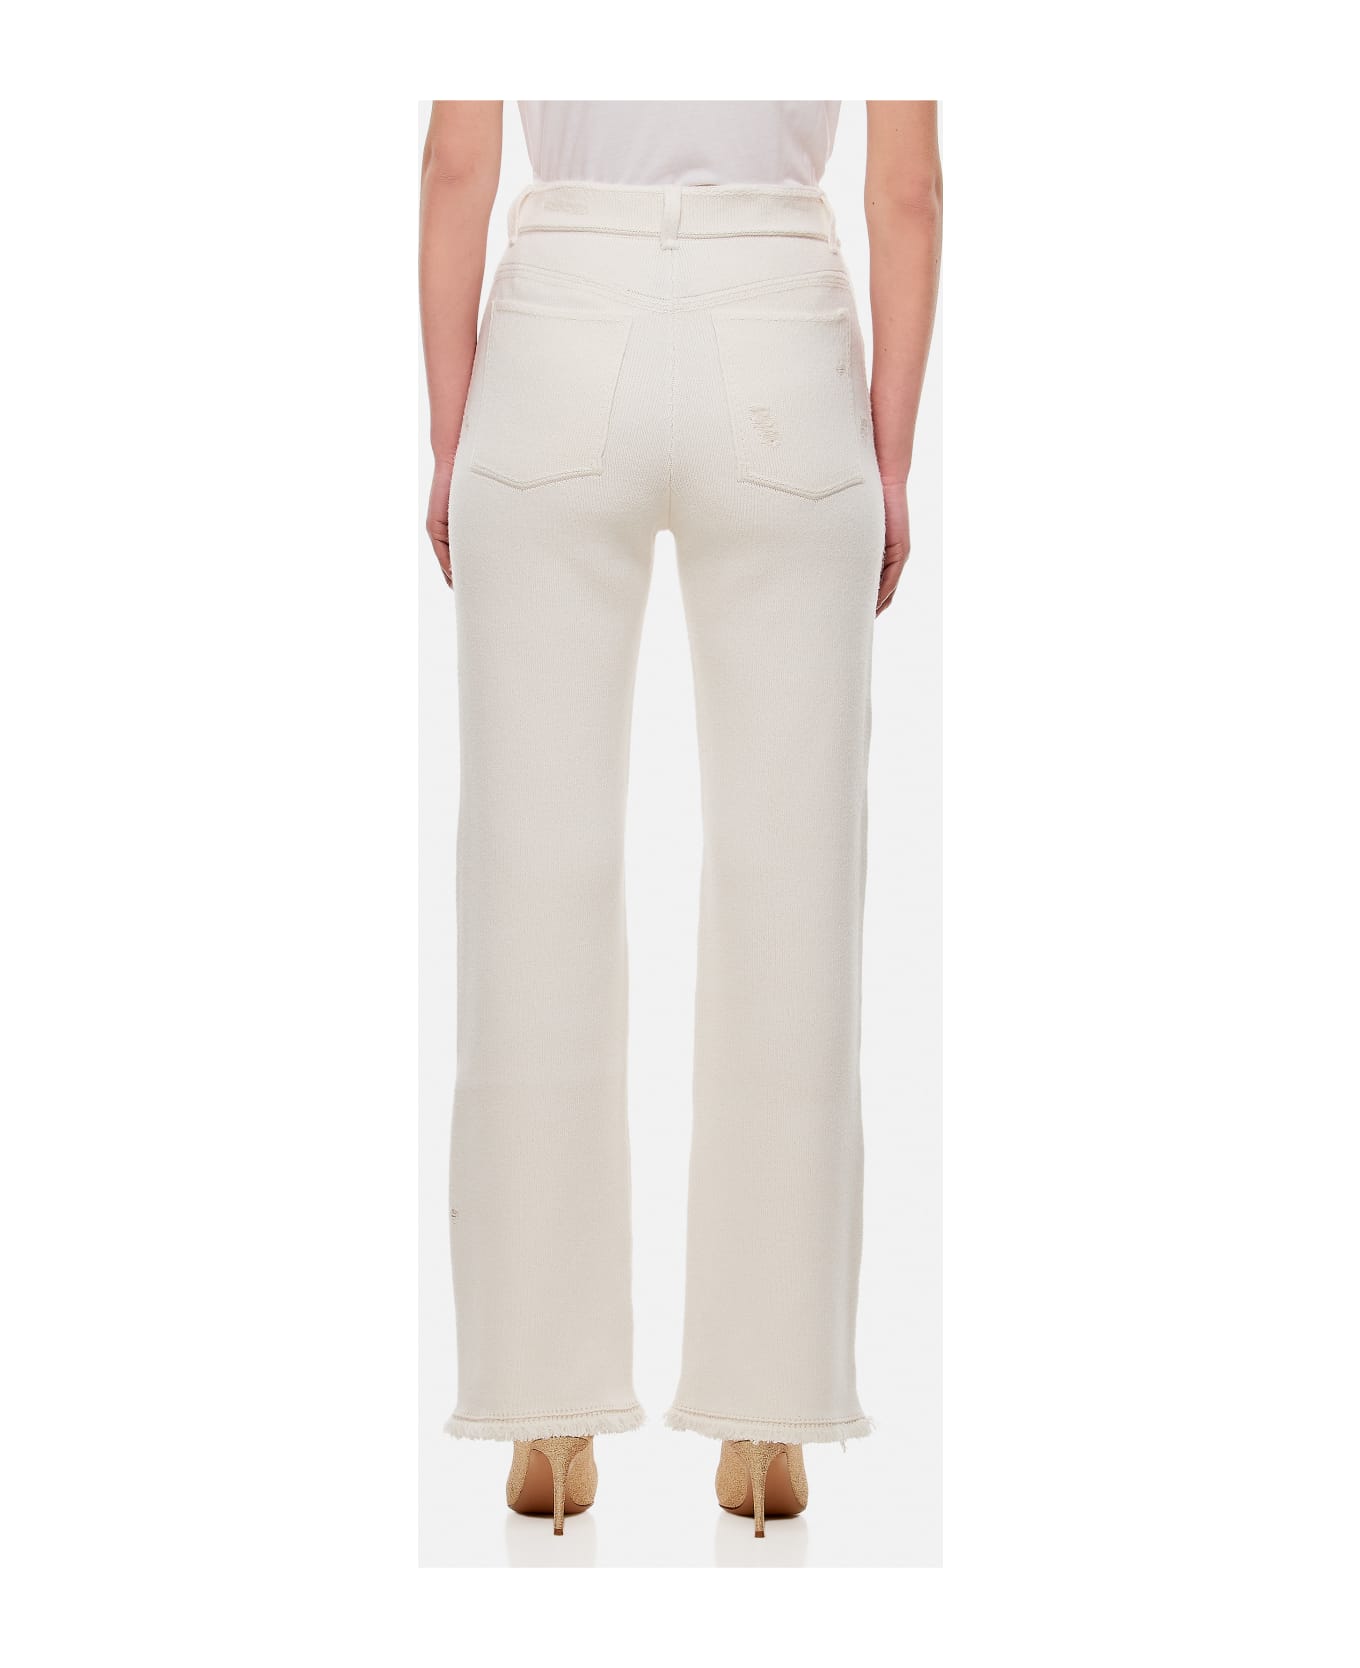 Barrie Cashmere Straight Pants - White ボトムス